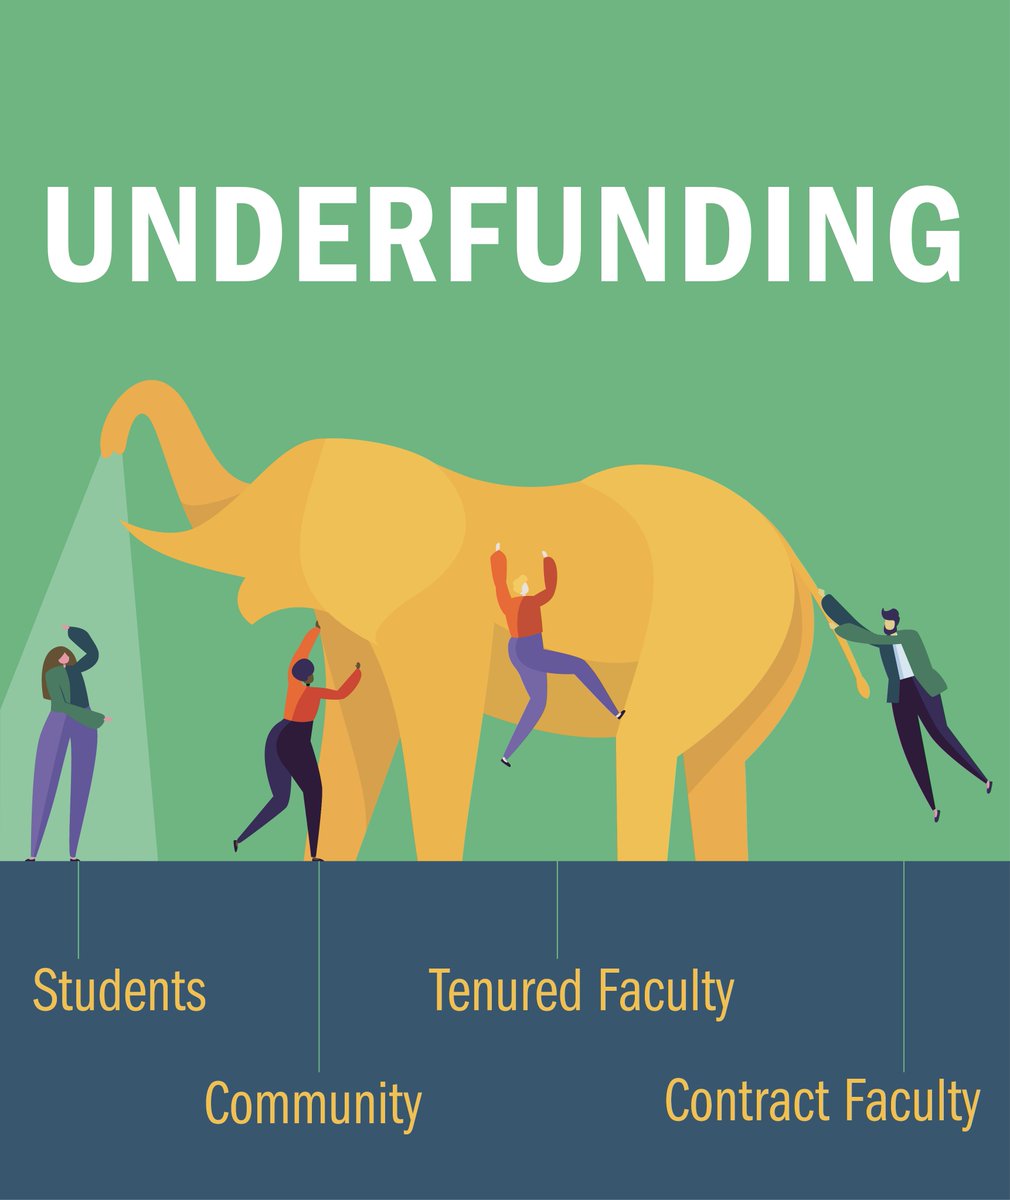 We need to address the elephant in the room. Faculty deserve job security, equal pay, and fair working conditions. Adequate, stable, and long-term funding of #OnPSE is needed to end precarity on campus. Ontario’s universities need more tenure-stream faculty!
#Fairness4CF #BrockU